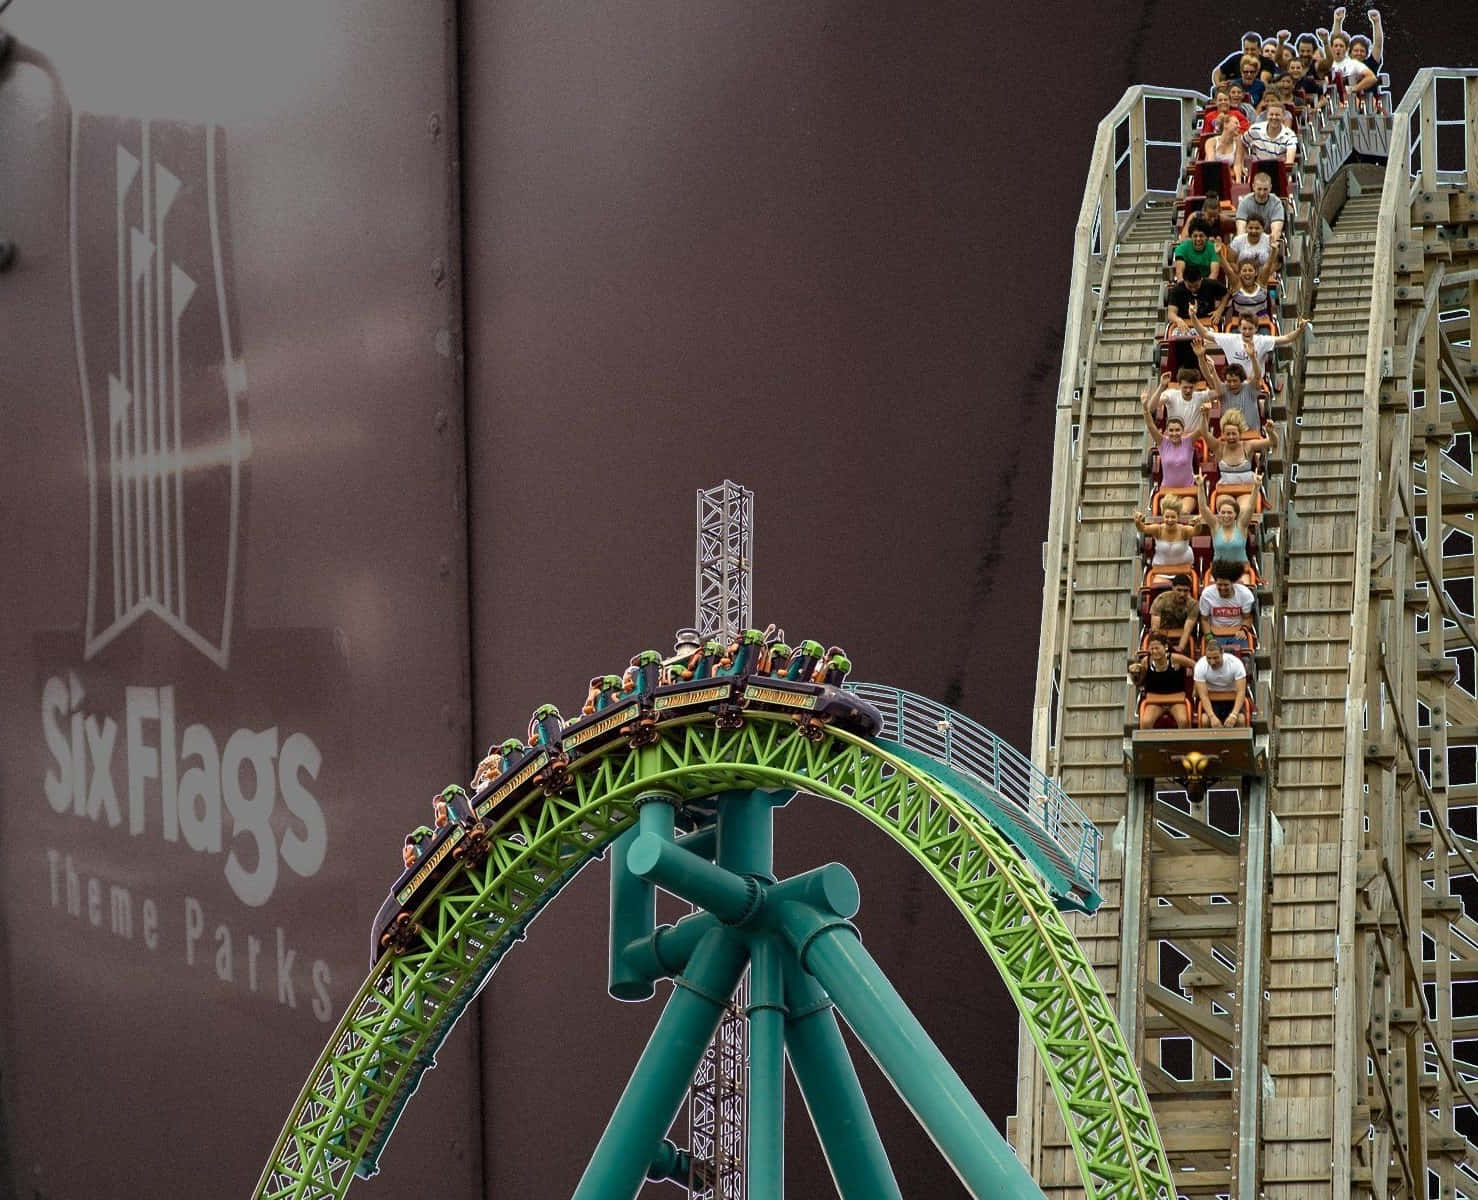 Feel the rush of excitement on a roller coaster.